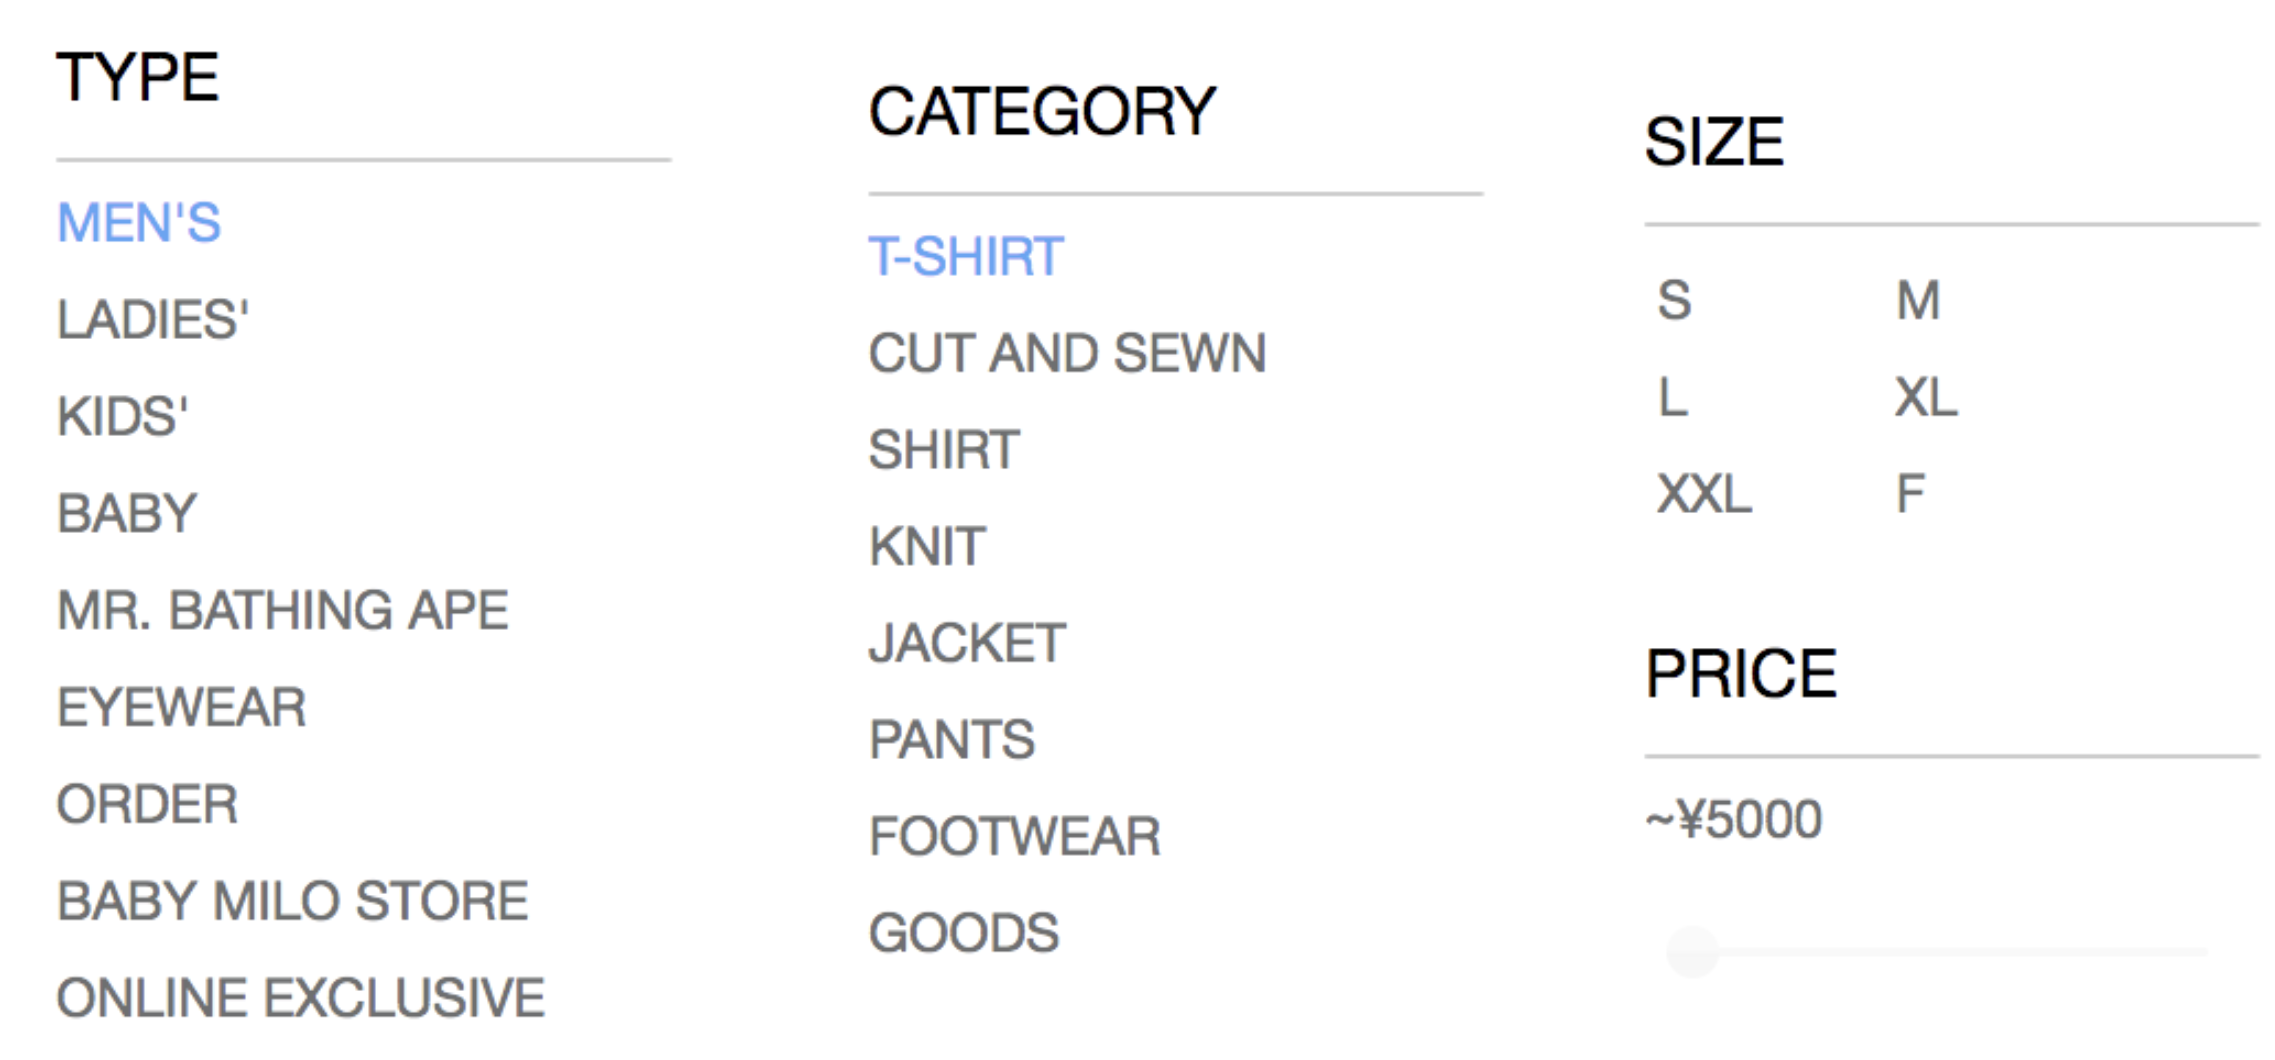 BAPE have many product categories